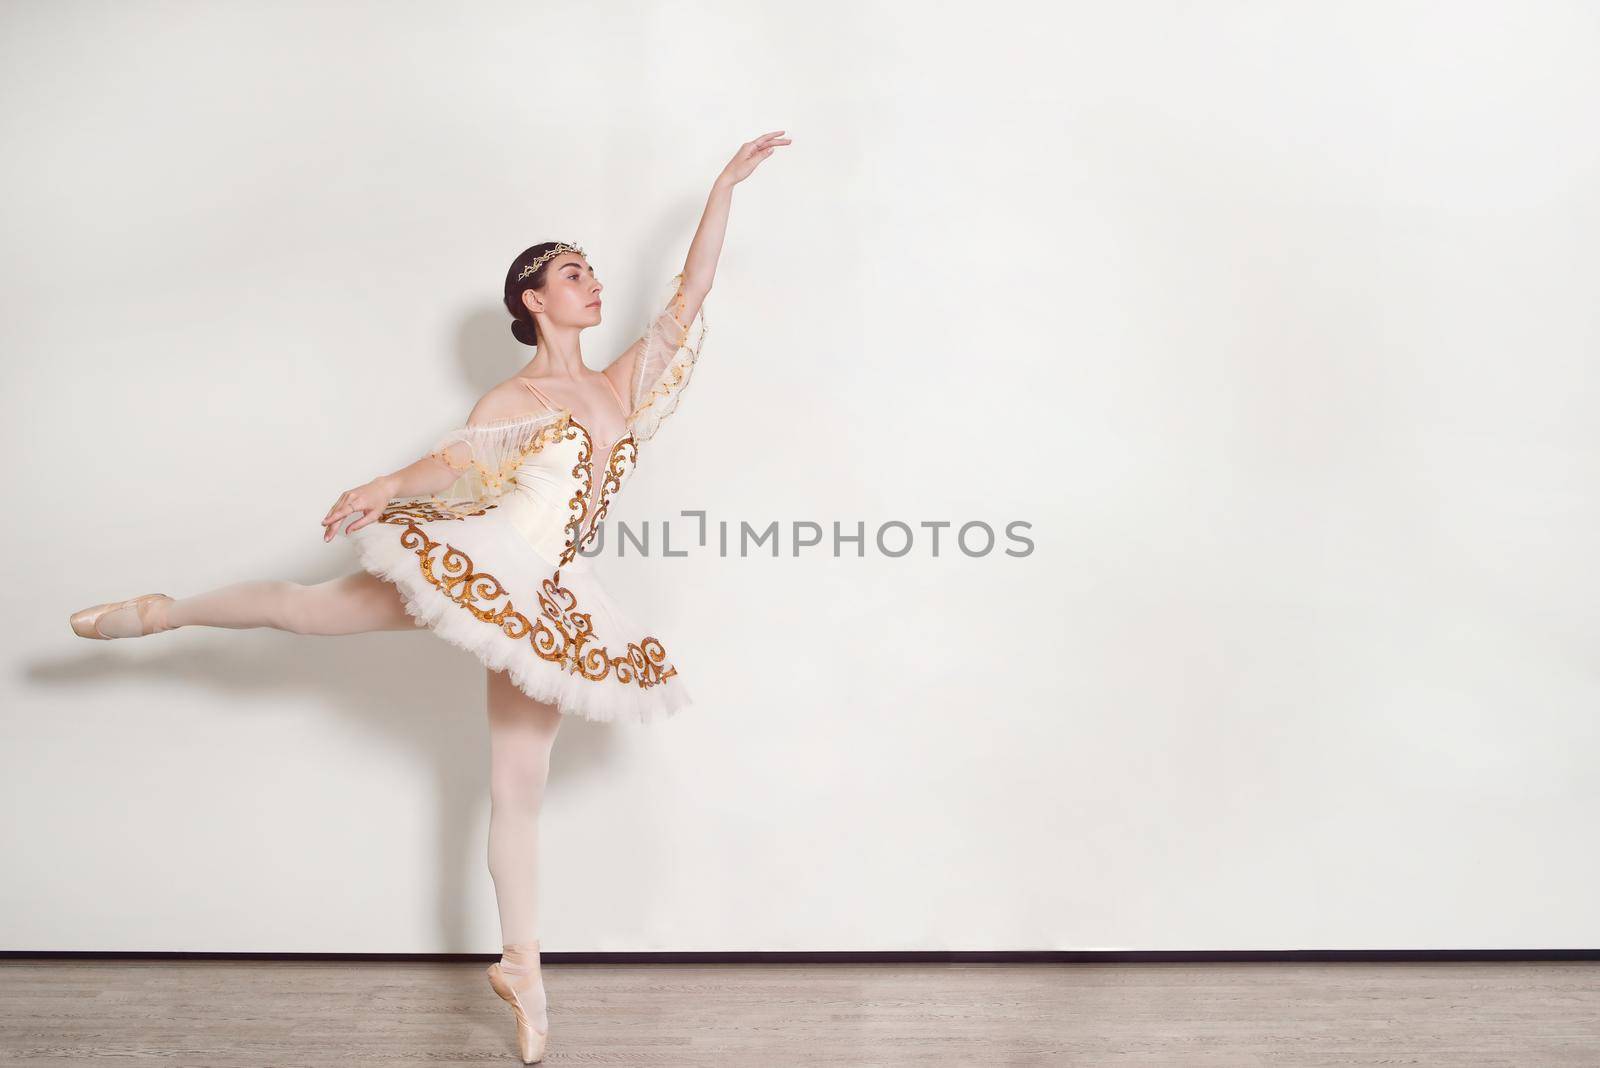 elegant ballerina performs ballet exercises in the studio against a white background by Nickstock